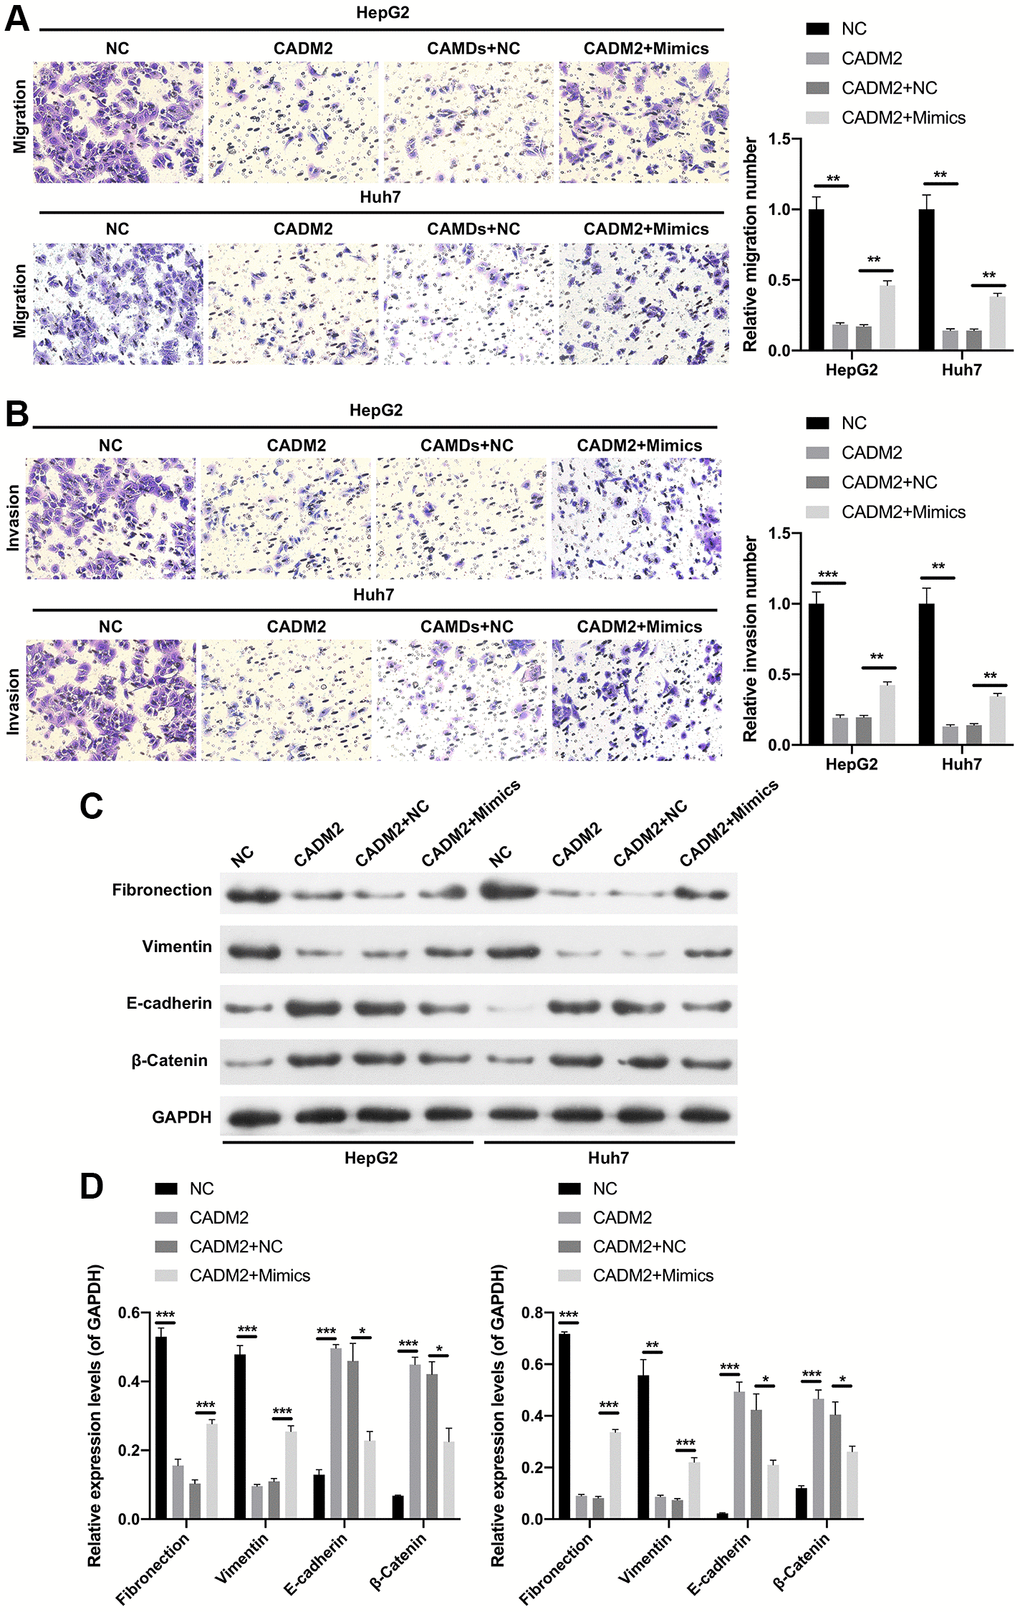 miR-1303 attenuated CADM2-mediated inhibition in migration and invasion of LC cells. HepG2 and Huh7 cells were transfected with miR-1303 mimics and circ